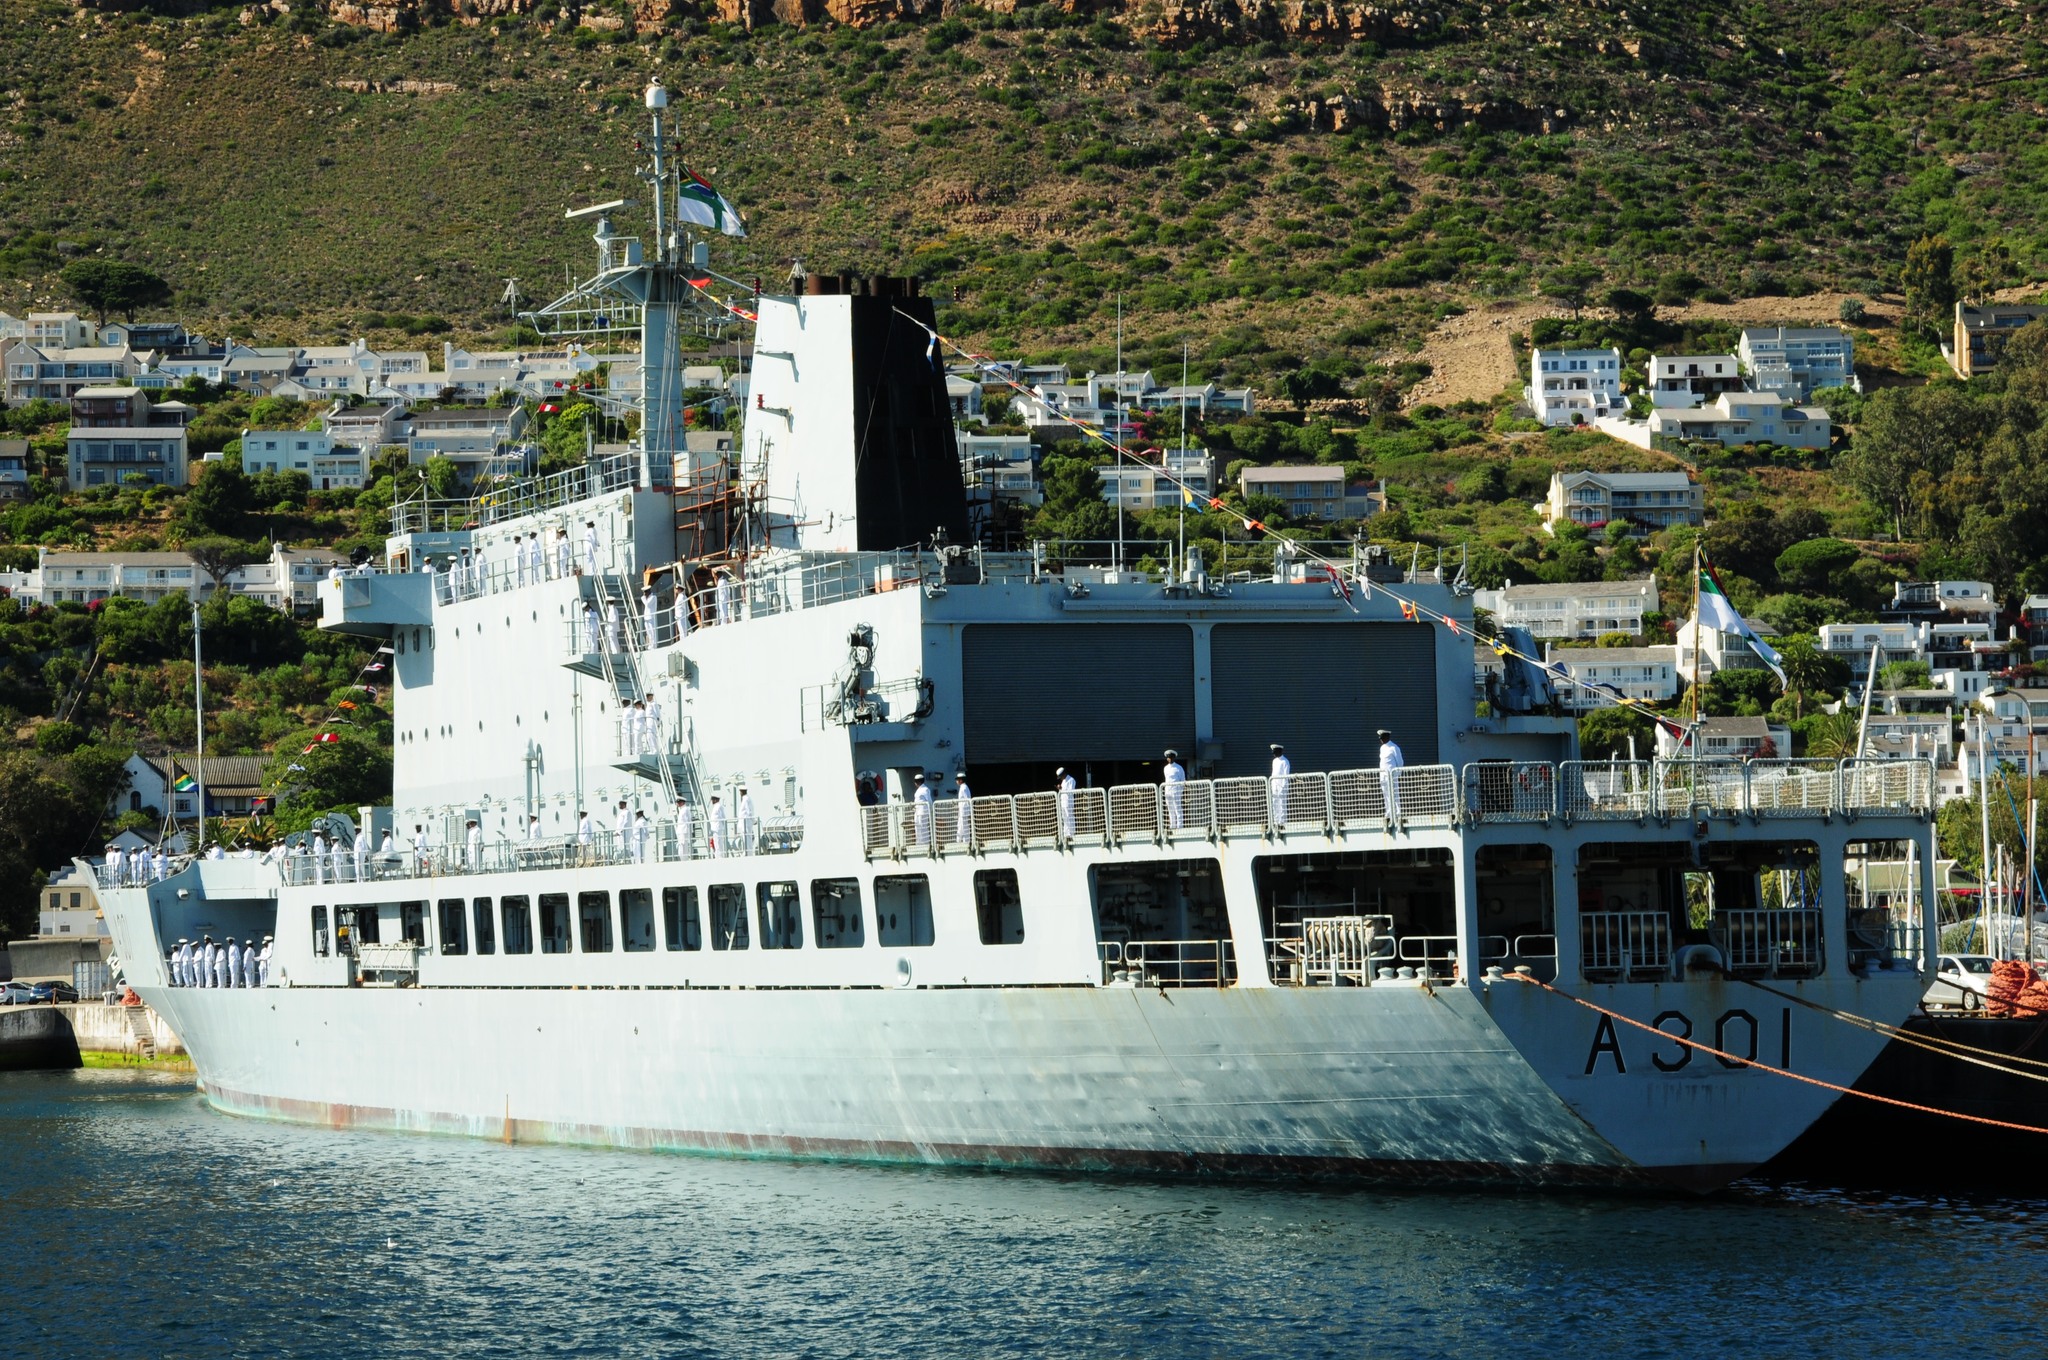 SOUTH AFRICA TO HOST THE PEOPLE’S LIBERATION ARMY NAVY FROM CHINA AND RUSSIAN FEDERAL NAVY DURING THE MULTILATERAL MARITIME EXERCISE OVER PERIOD 17 TO 27 FEBRUARY 2023